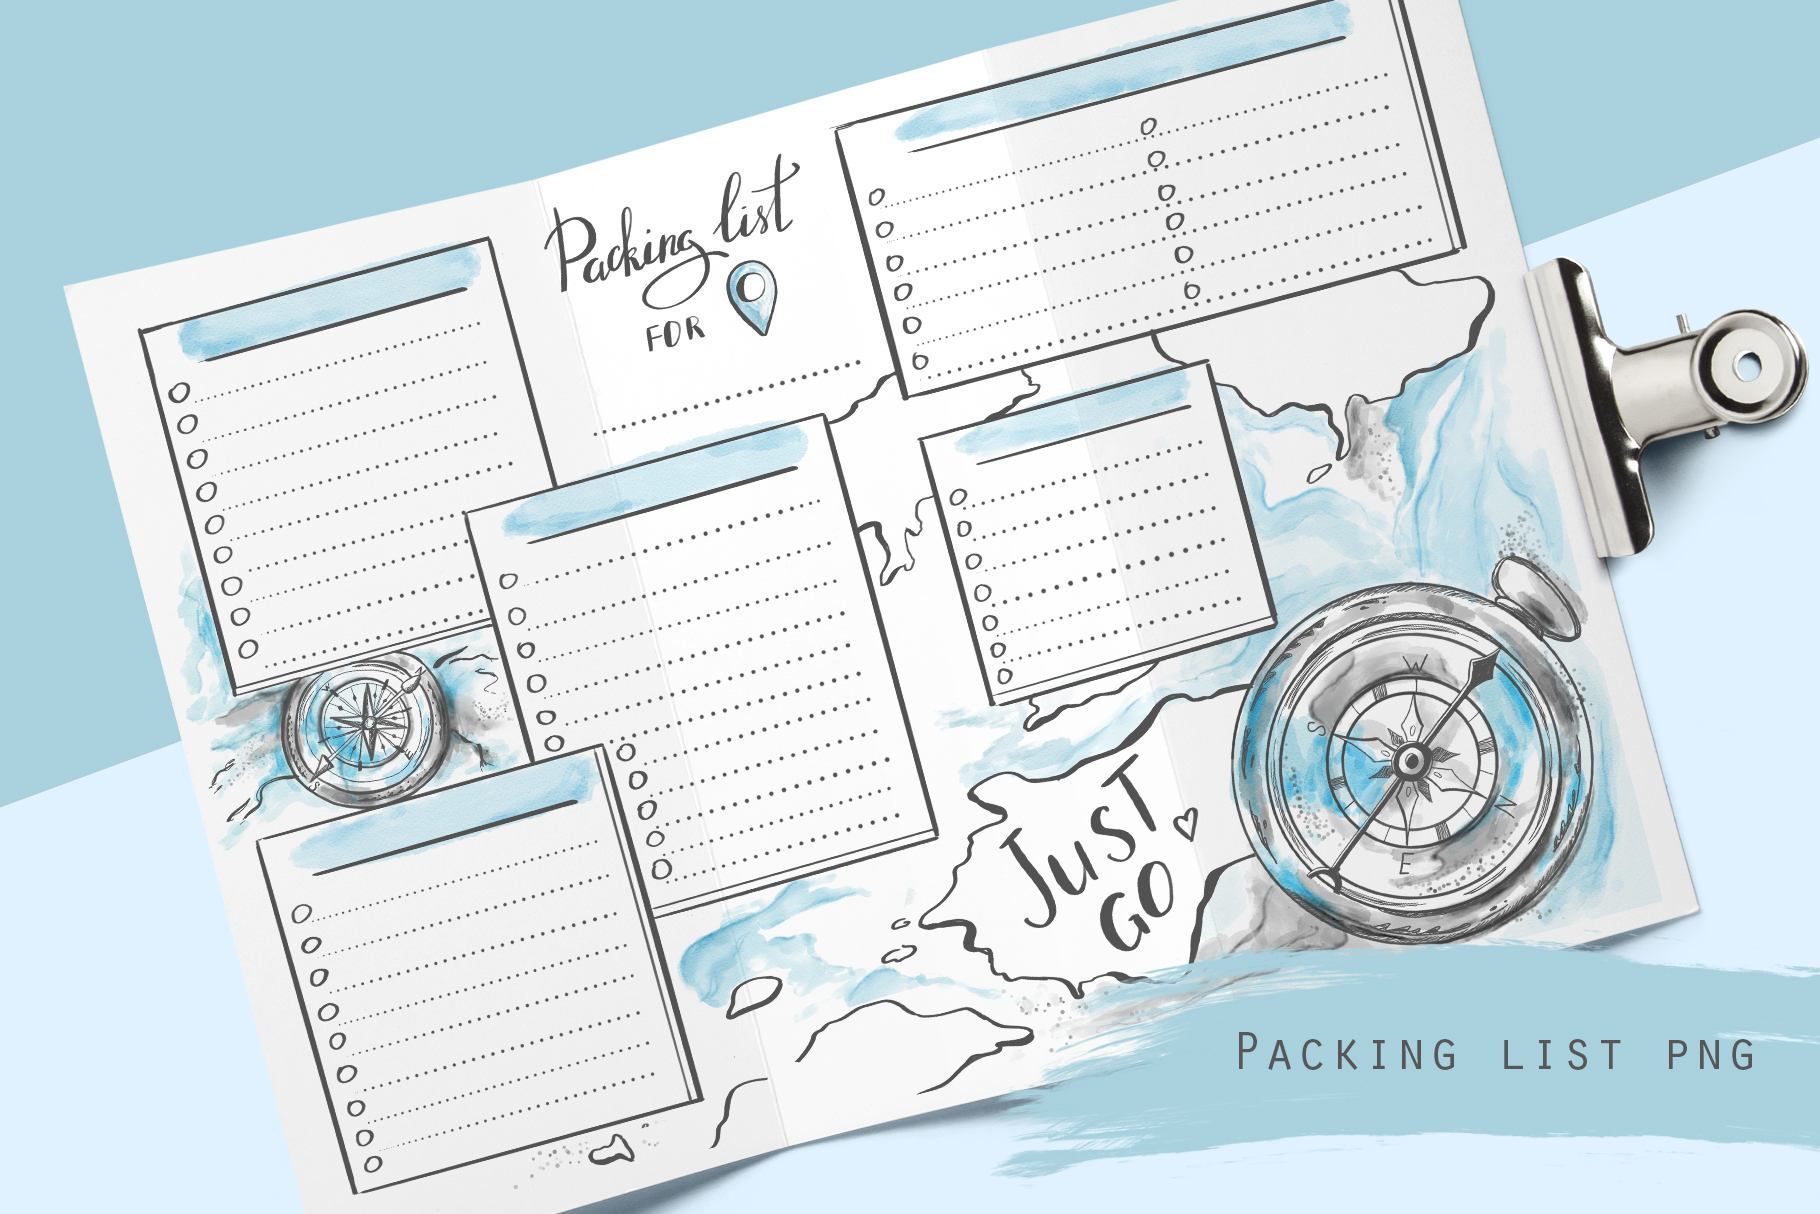 Printable Travel packing list - Holiday or vacation Check list - Inser –  DigitallyWild